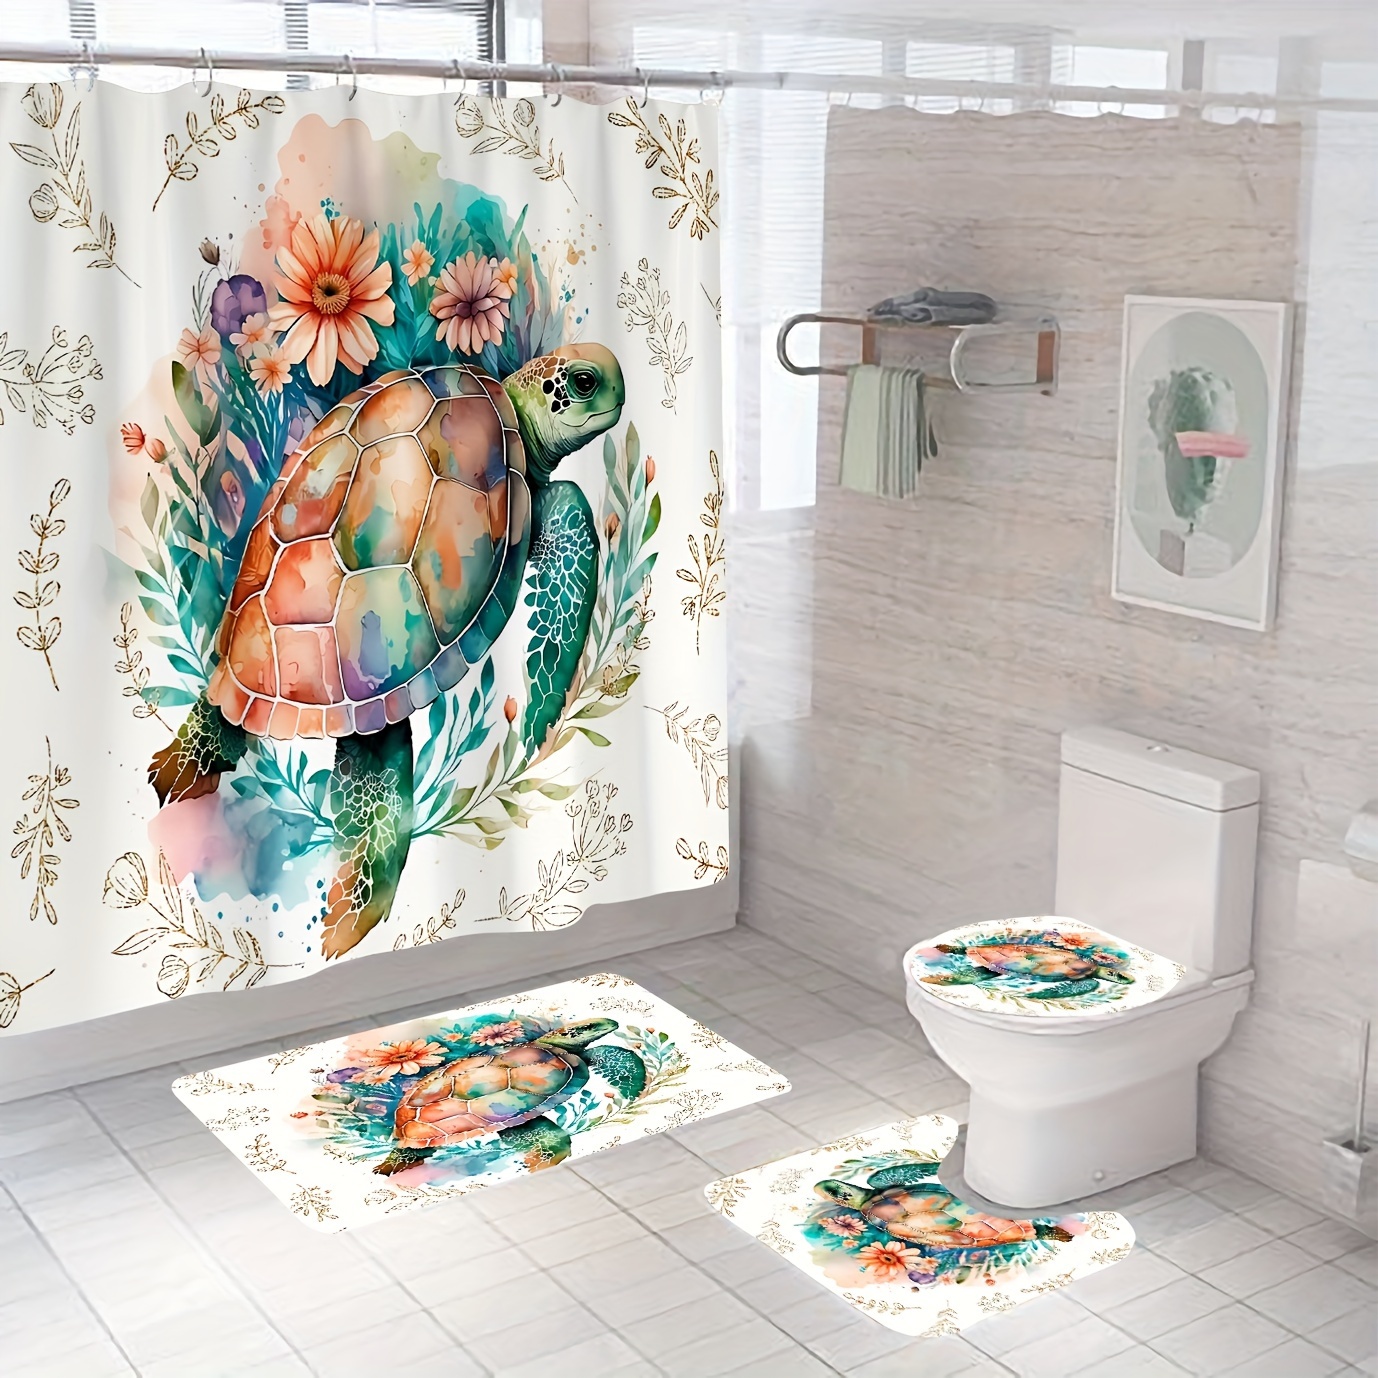 

Sea Turtle Bathroom Set - 4 Pieces Including Shower Curtain, Non-slip Rug, Toilet Lid Cover & U-shaped Mat - Machine Washable, Waterproof Polyester